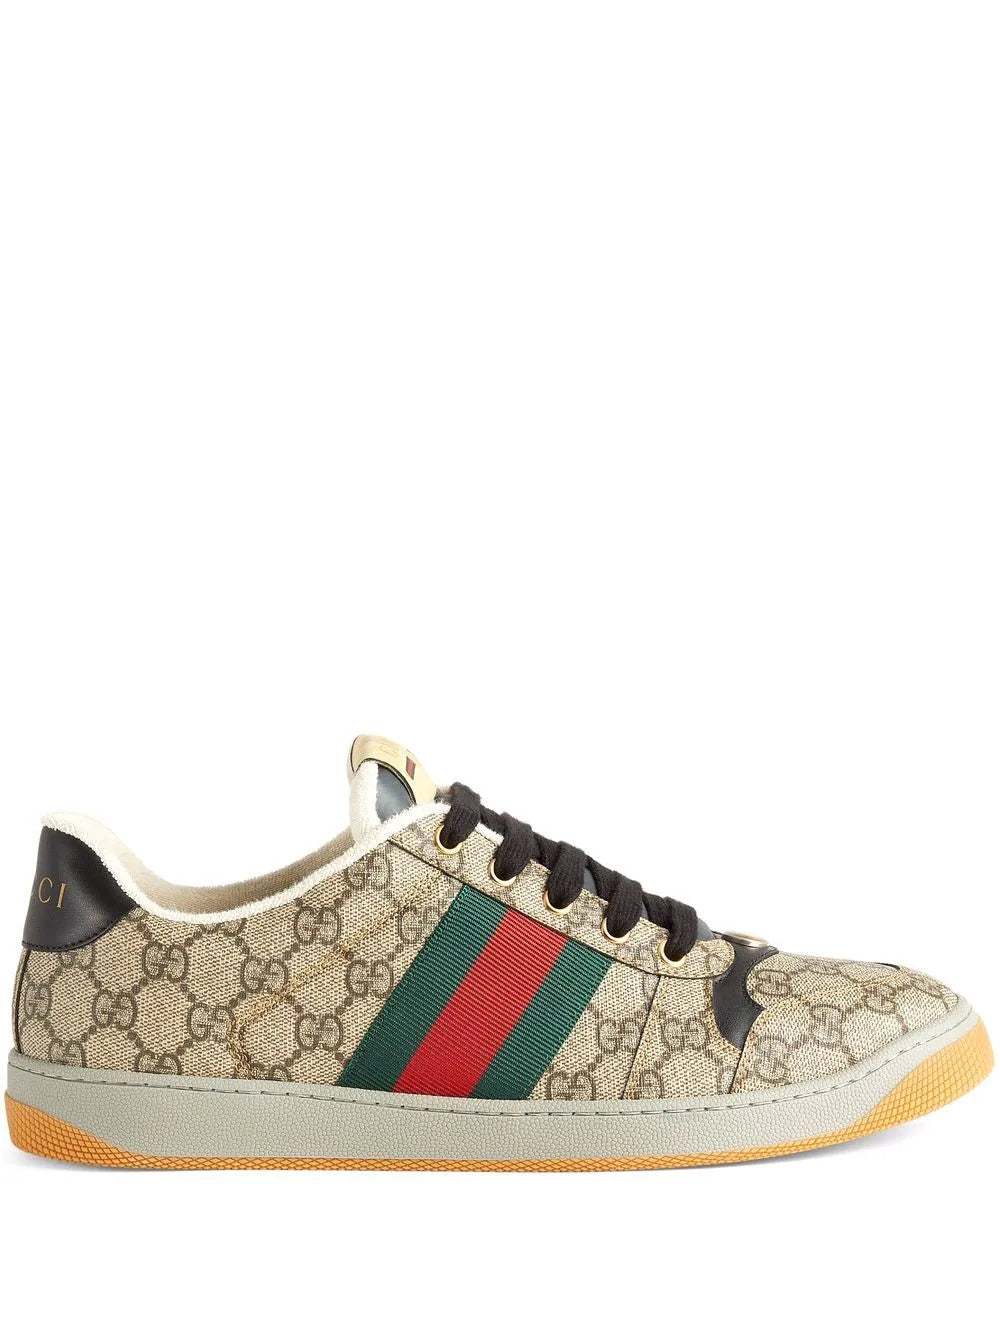 Loafers and More – Rvce News, Gucci Launches New MLB Collaboration with  Sneakers, Gucci Black Run Low-Top Sneakers